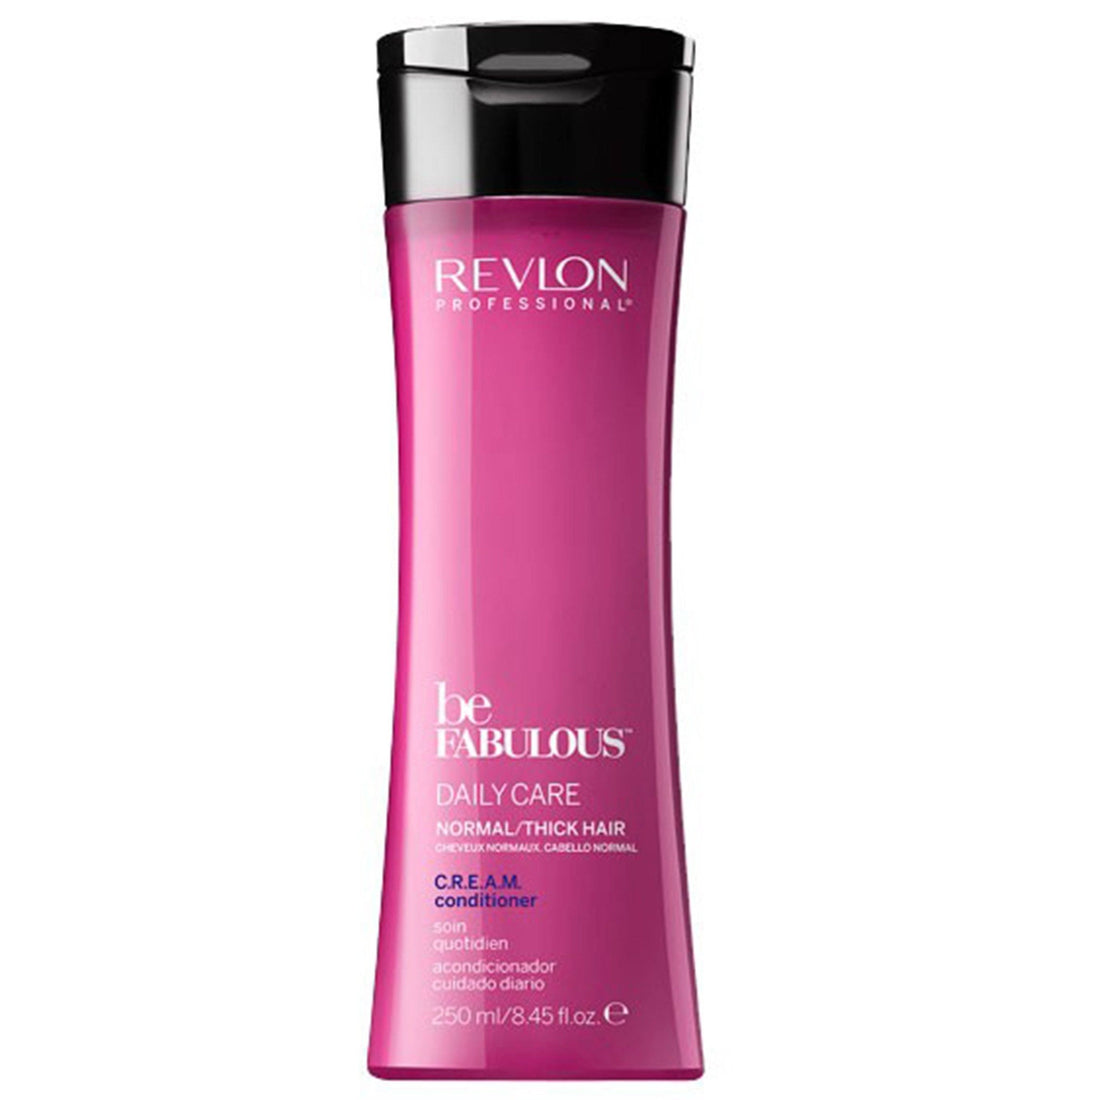 Buy Revlon Professional Be Fabulous Daily Care Normal/Thick Conditioner 250ml on HairMNL